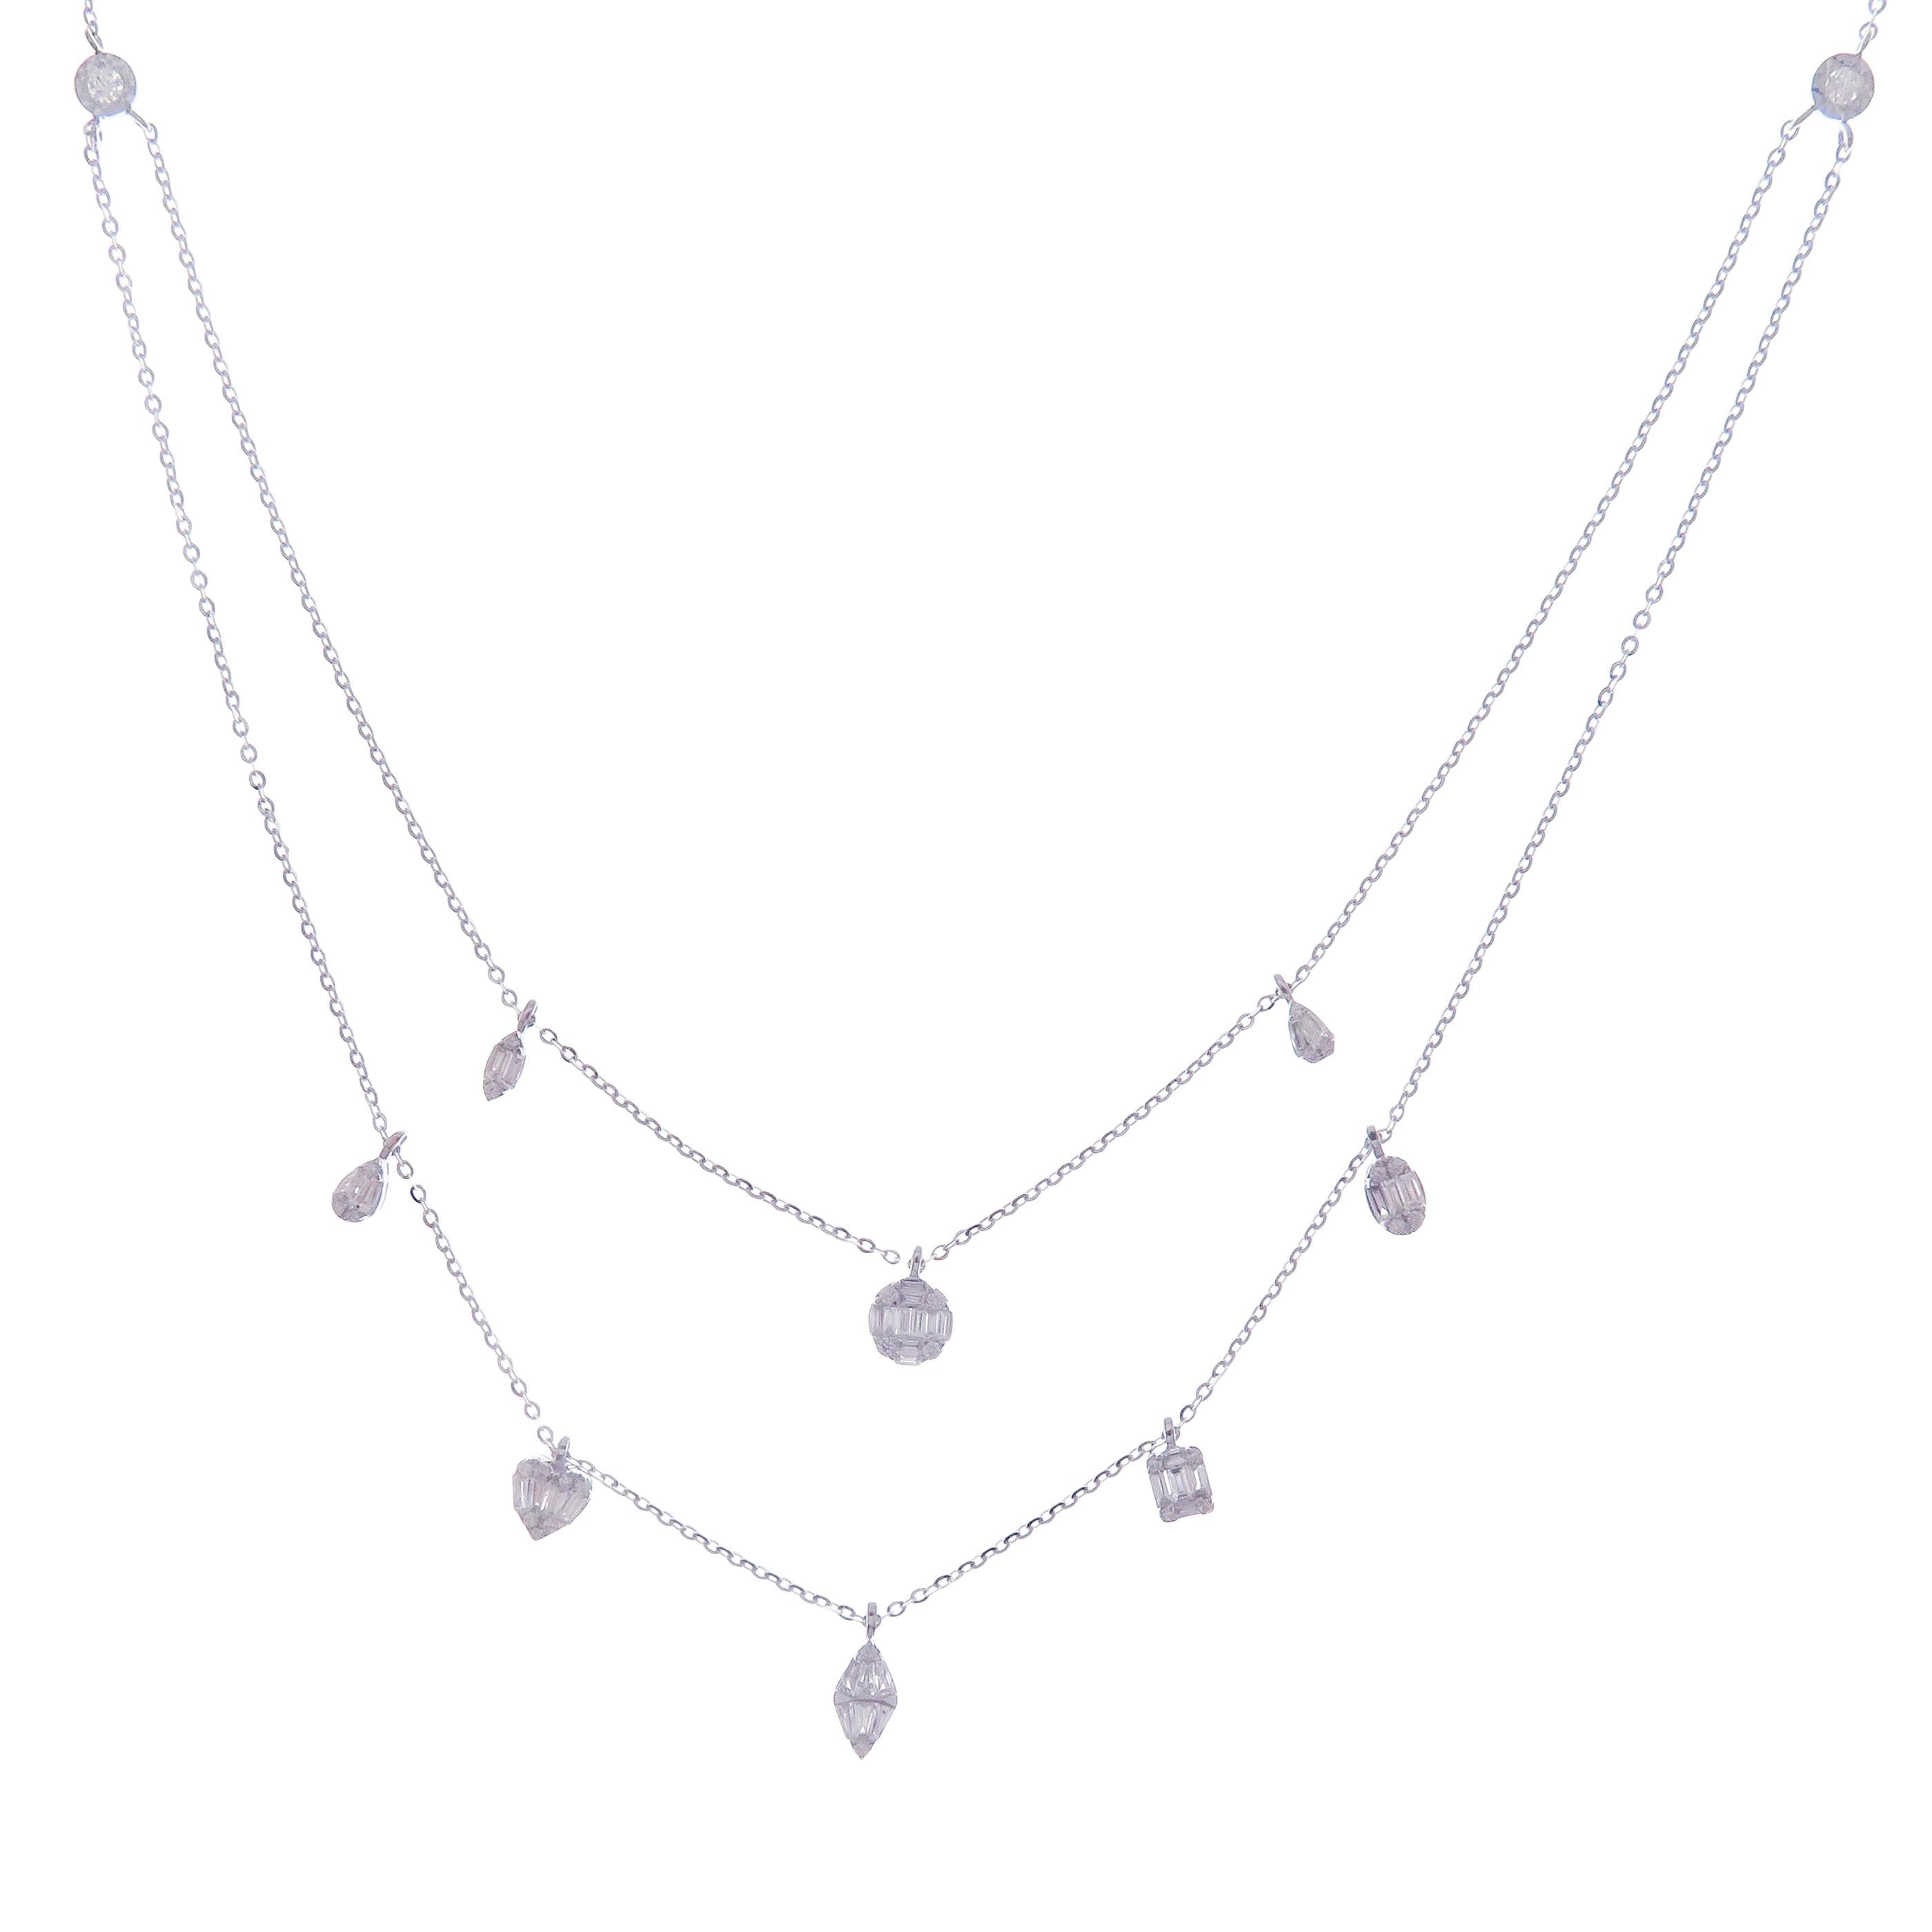 This delicate double-strand necklace is crafted in 18-karat white gold, weighing approximately 1.02 total carats of SI-H Quality white diamonds. 

Necklace is 16